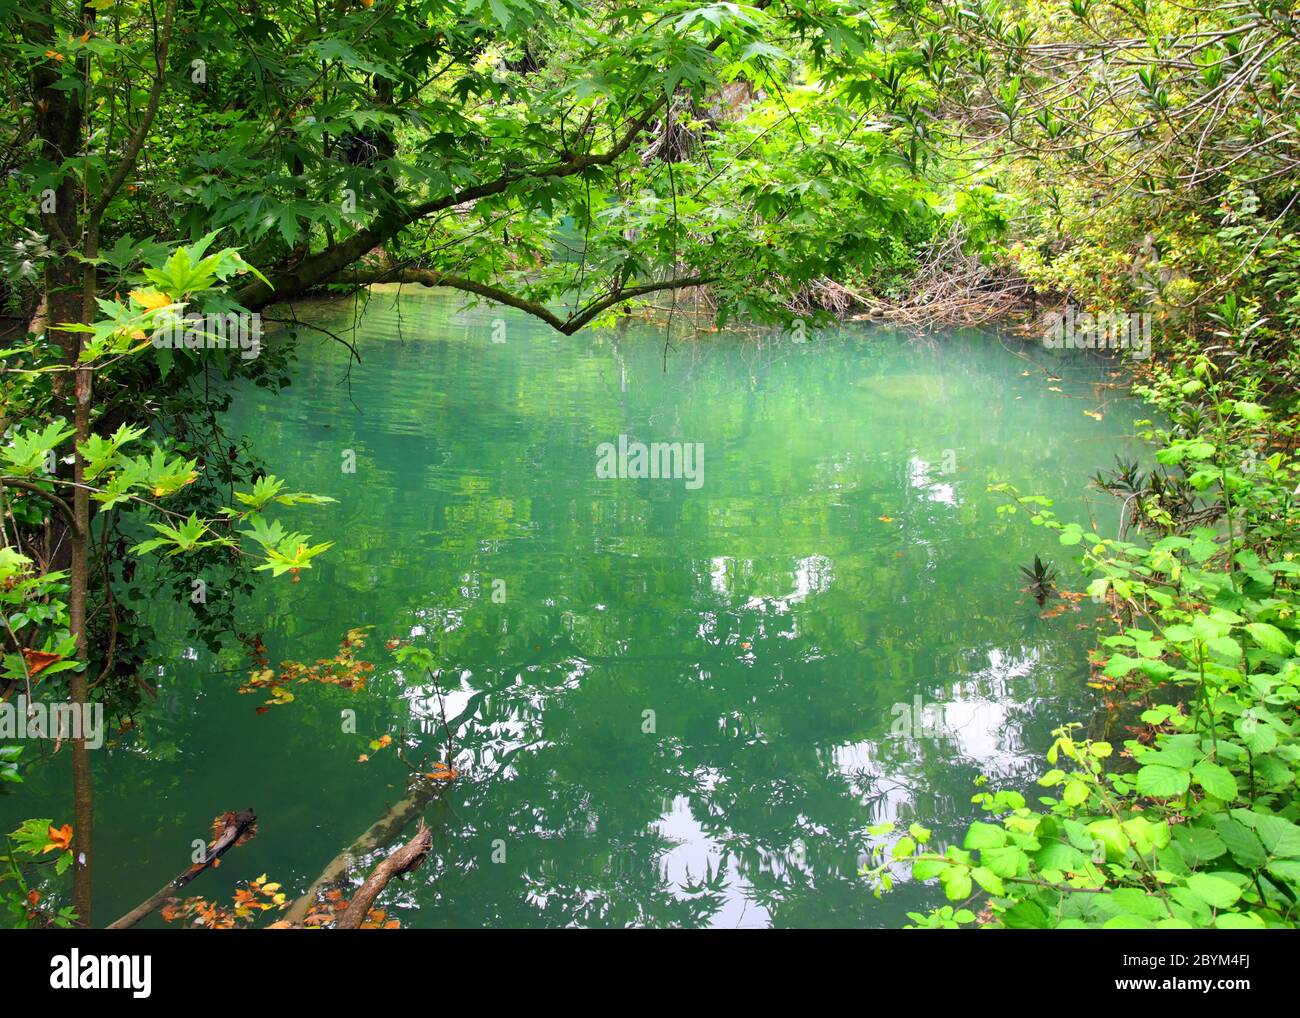 small lake in tropical thicket Stock Photo